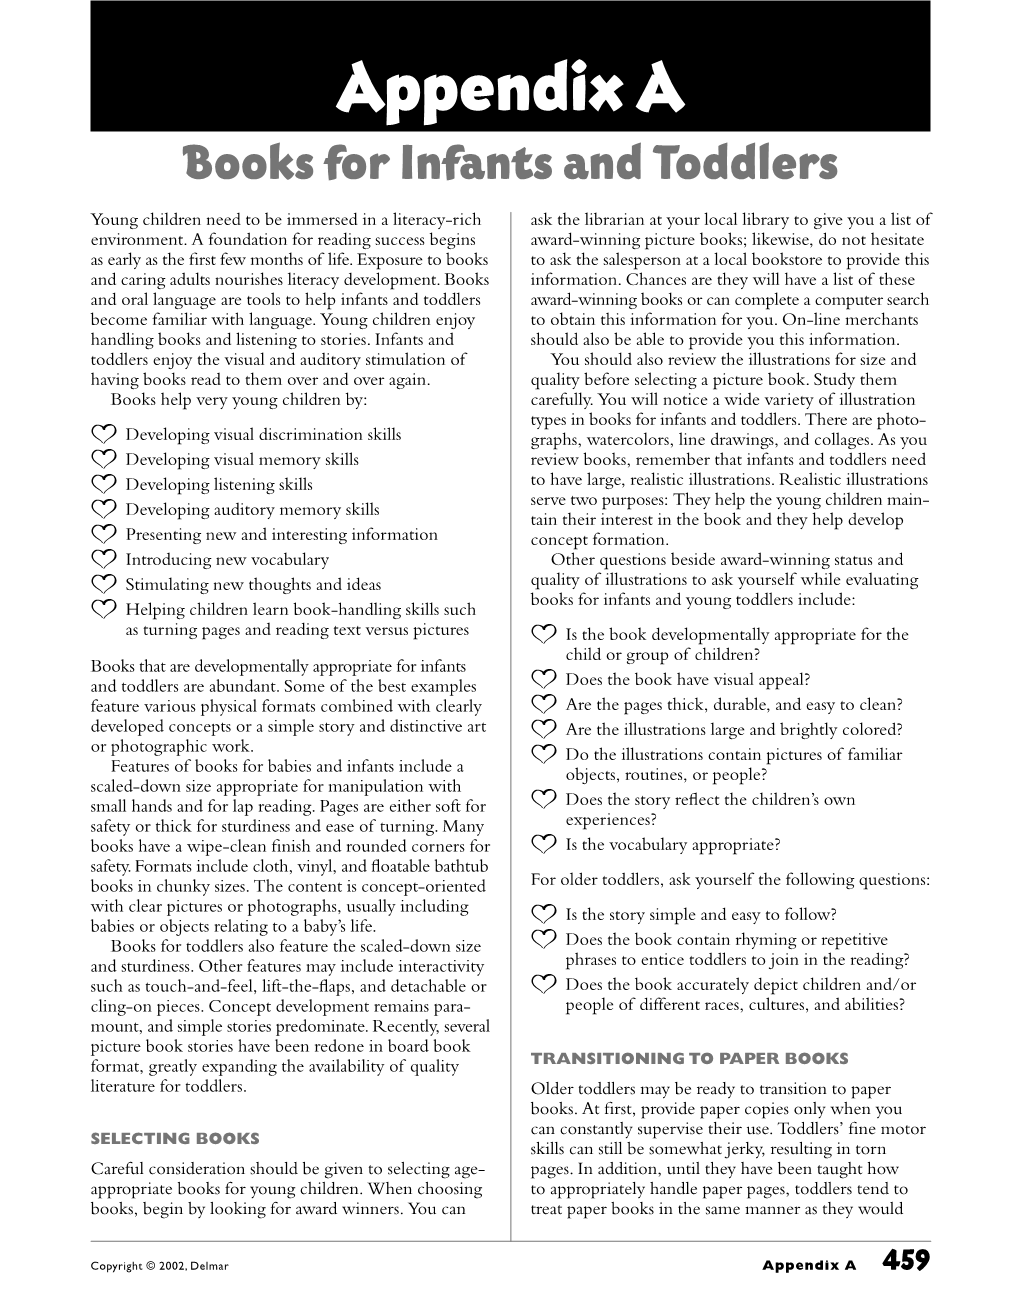 Books for Infants and Toddlers